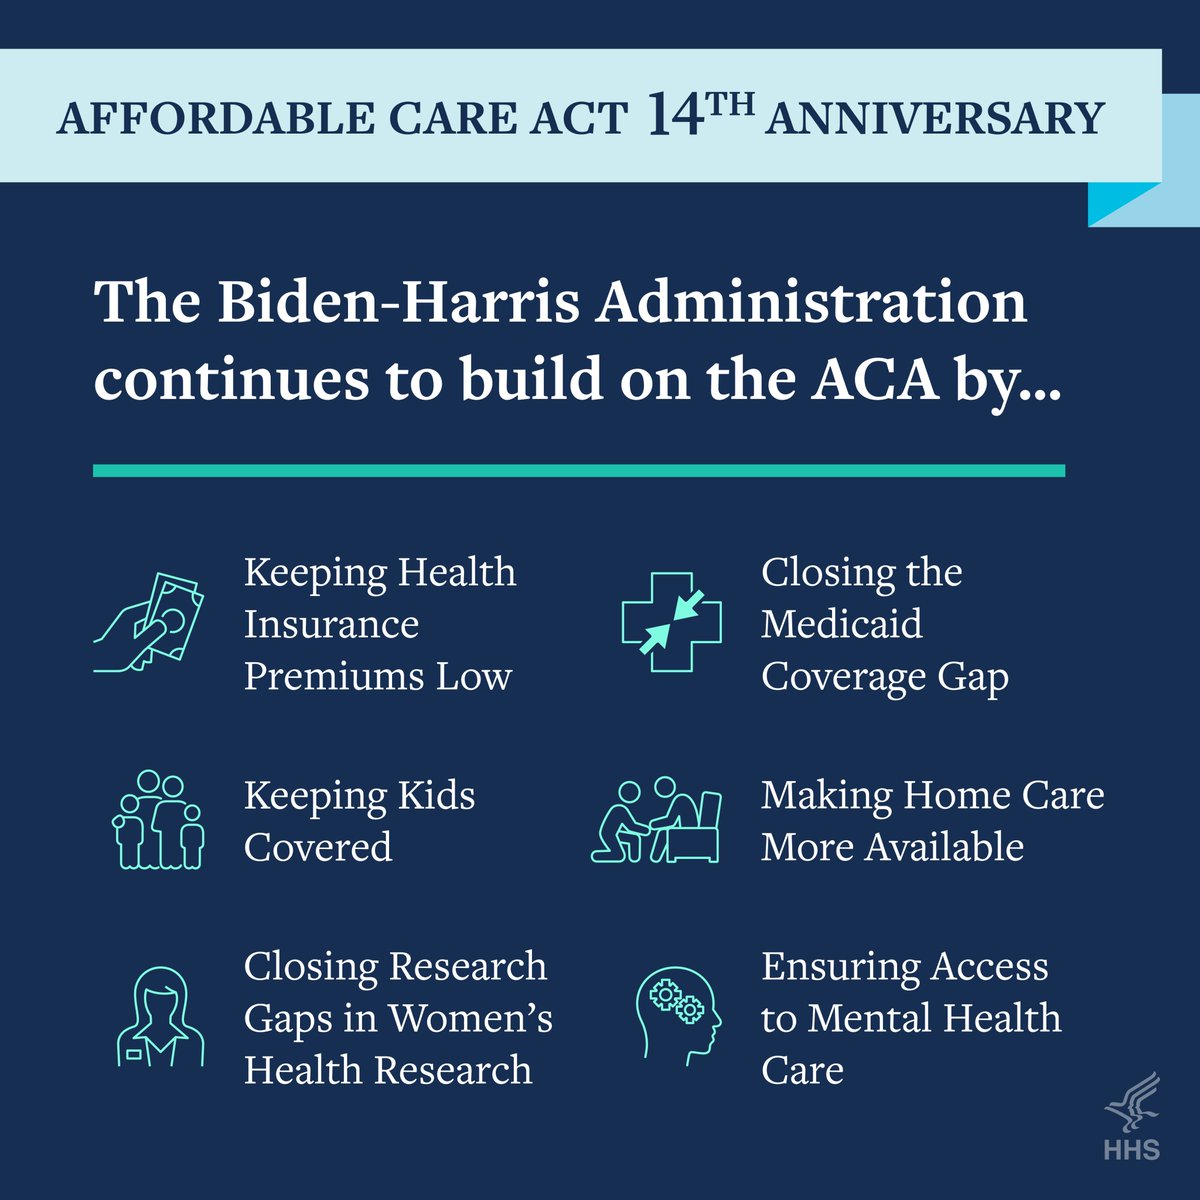 Today we celebrate 14 years of the #AffordableCareAct. Thanks to the #ACA and the #InflationReductionAct, young people can now have health care coverage for as low as $10/month.